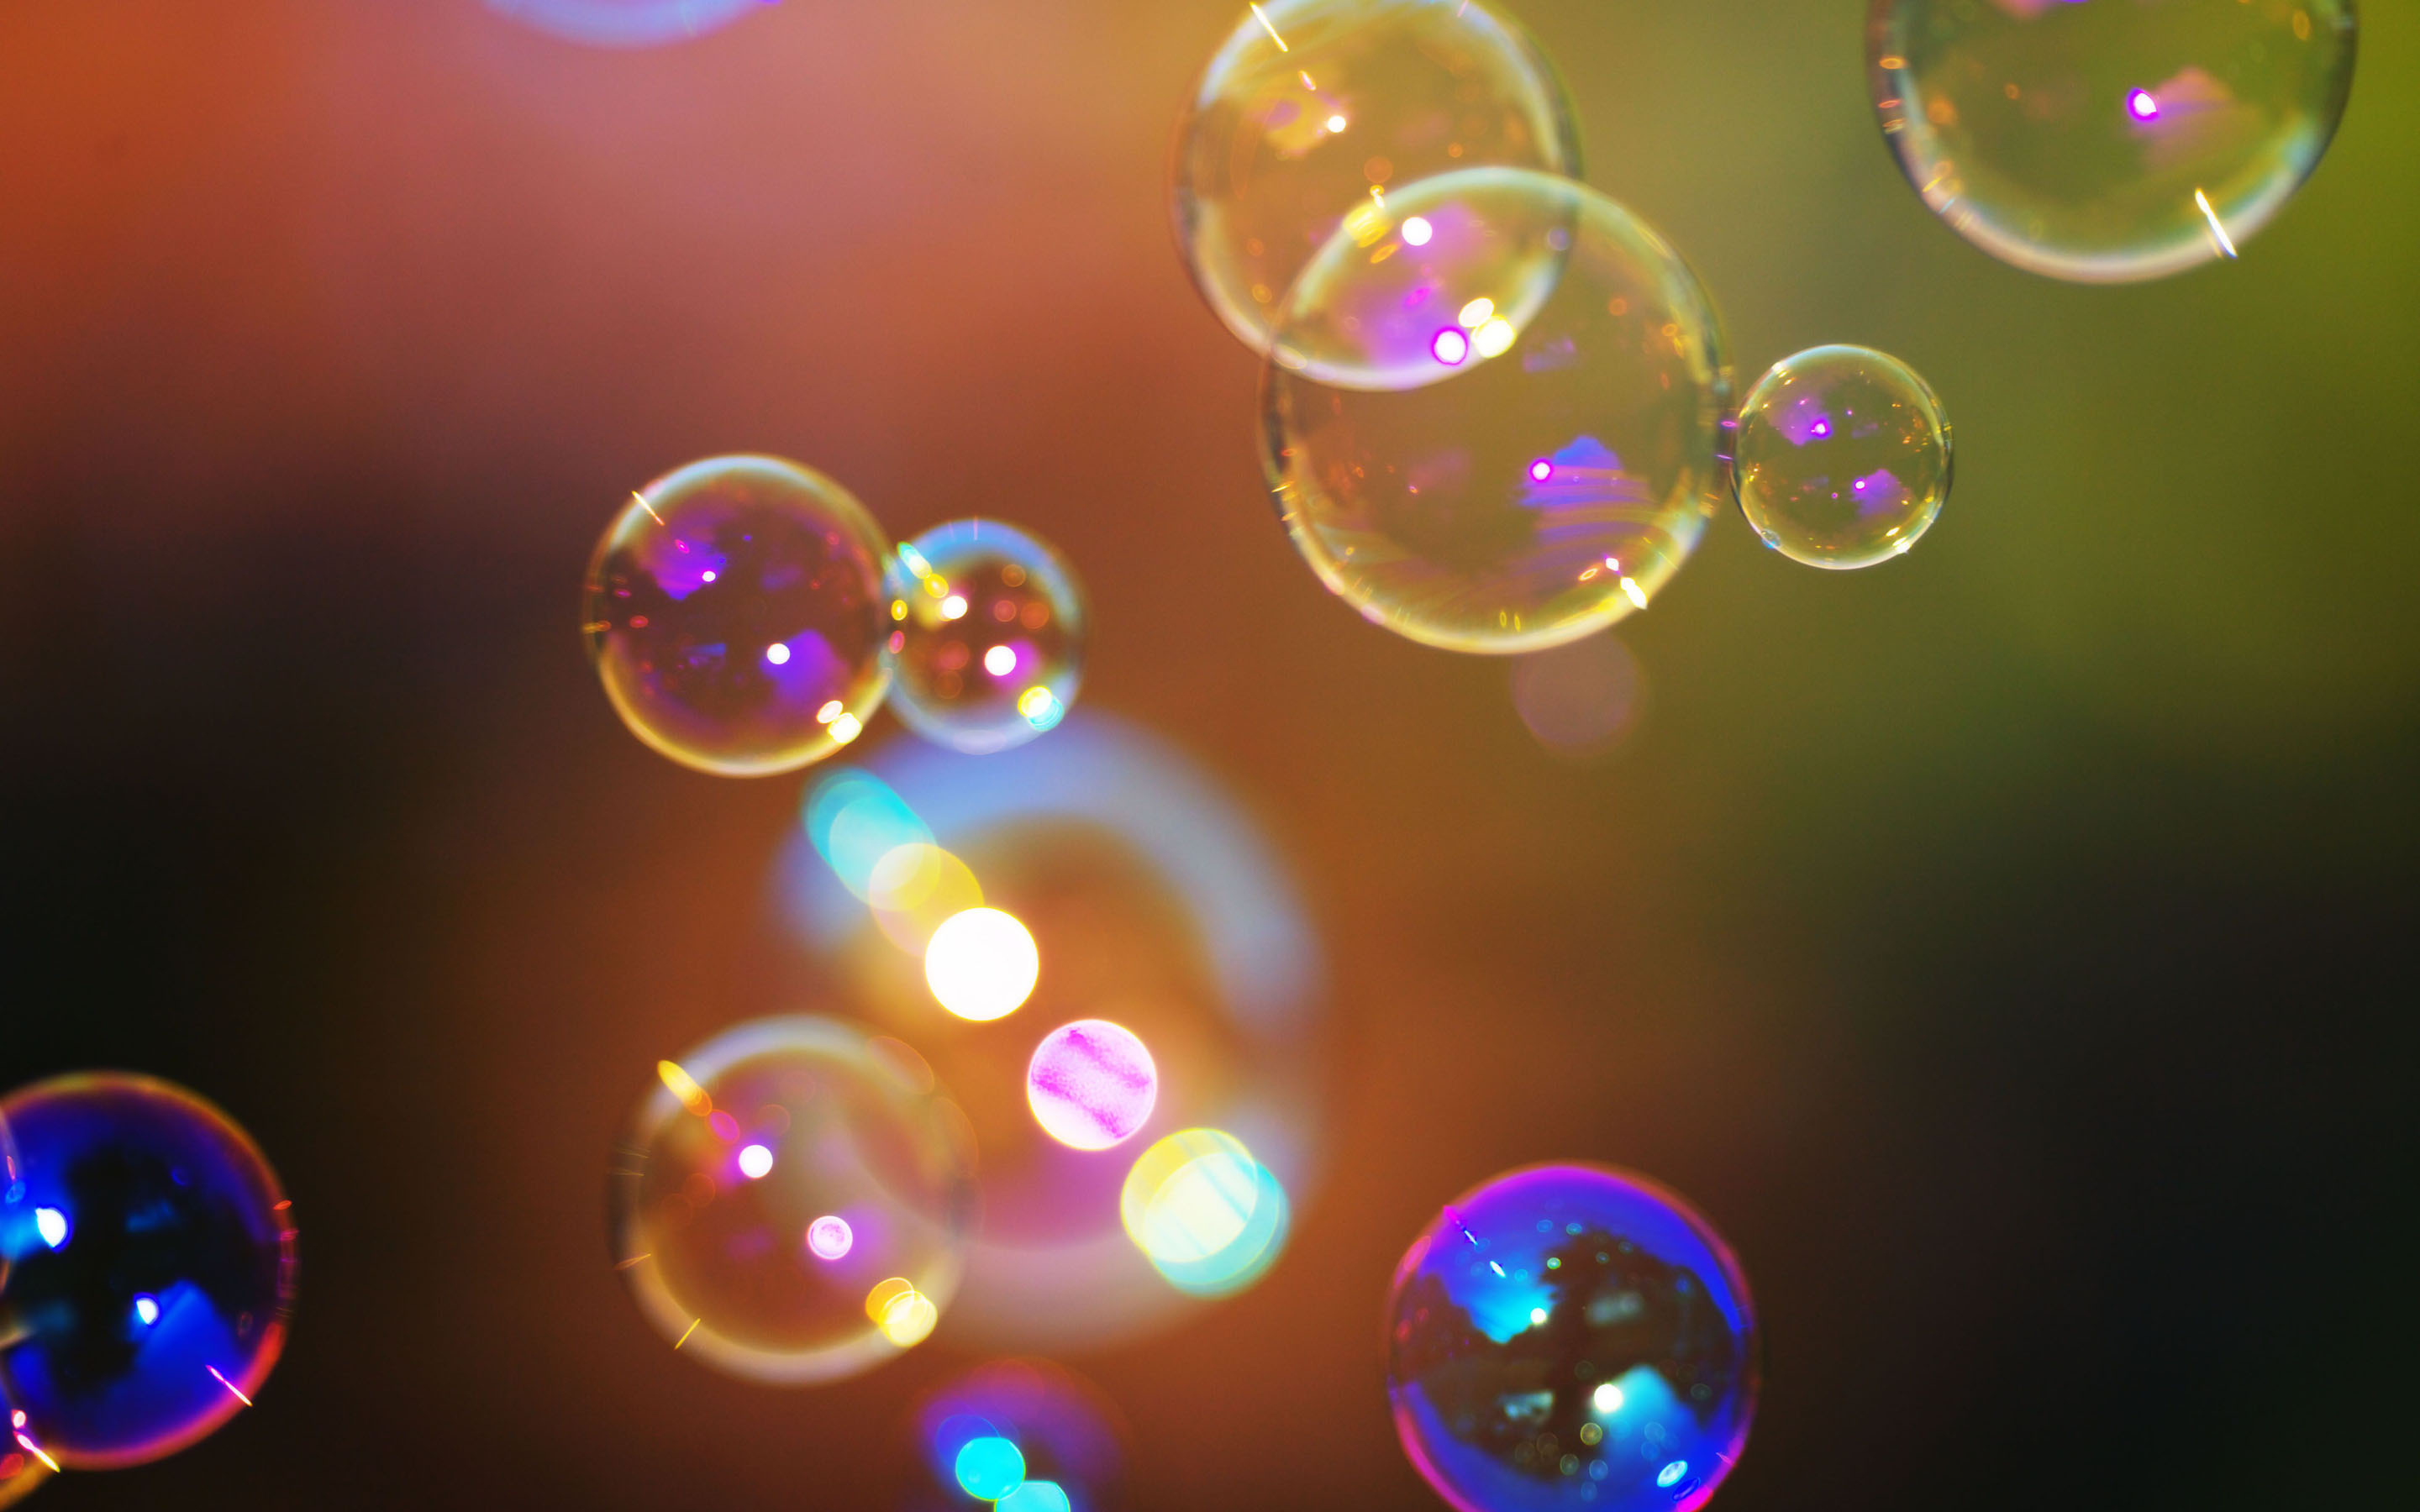 effervescent has bubbles or froth like a sparkling wine or a bubble